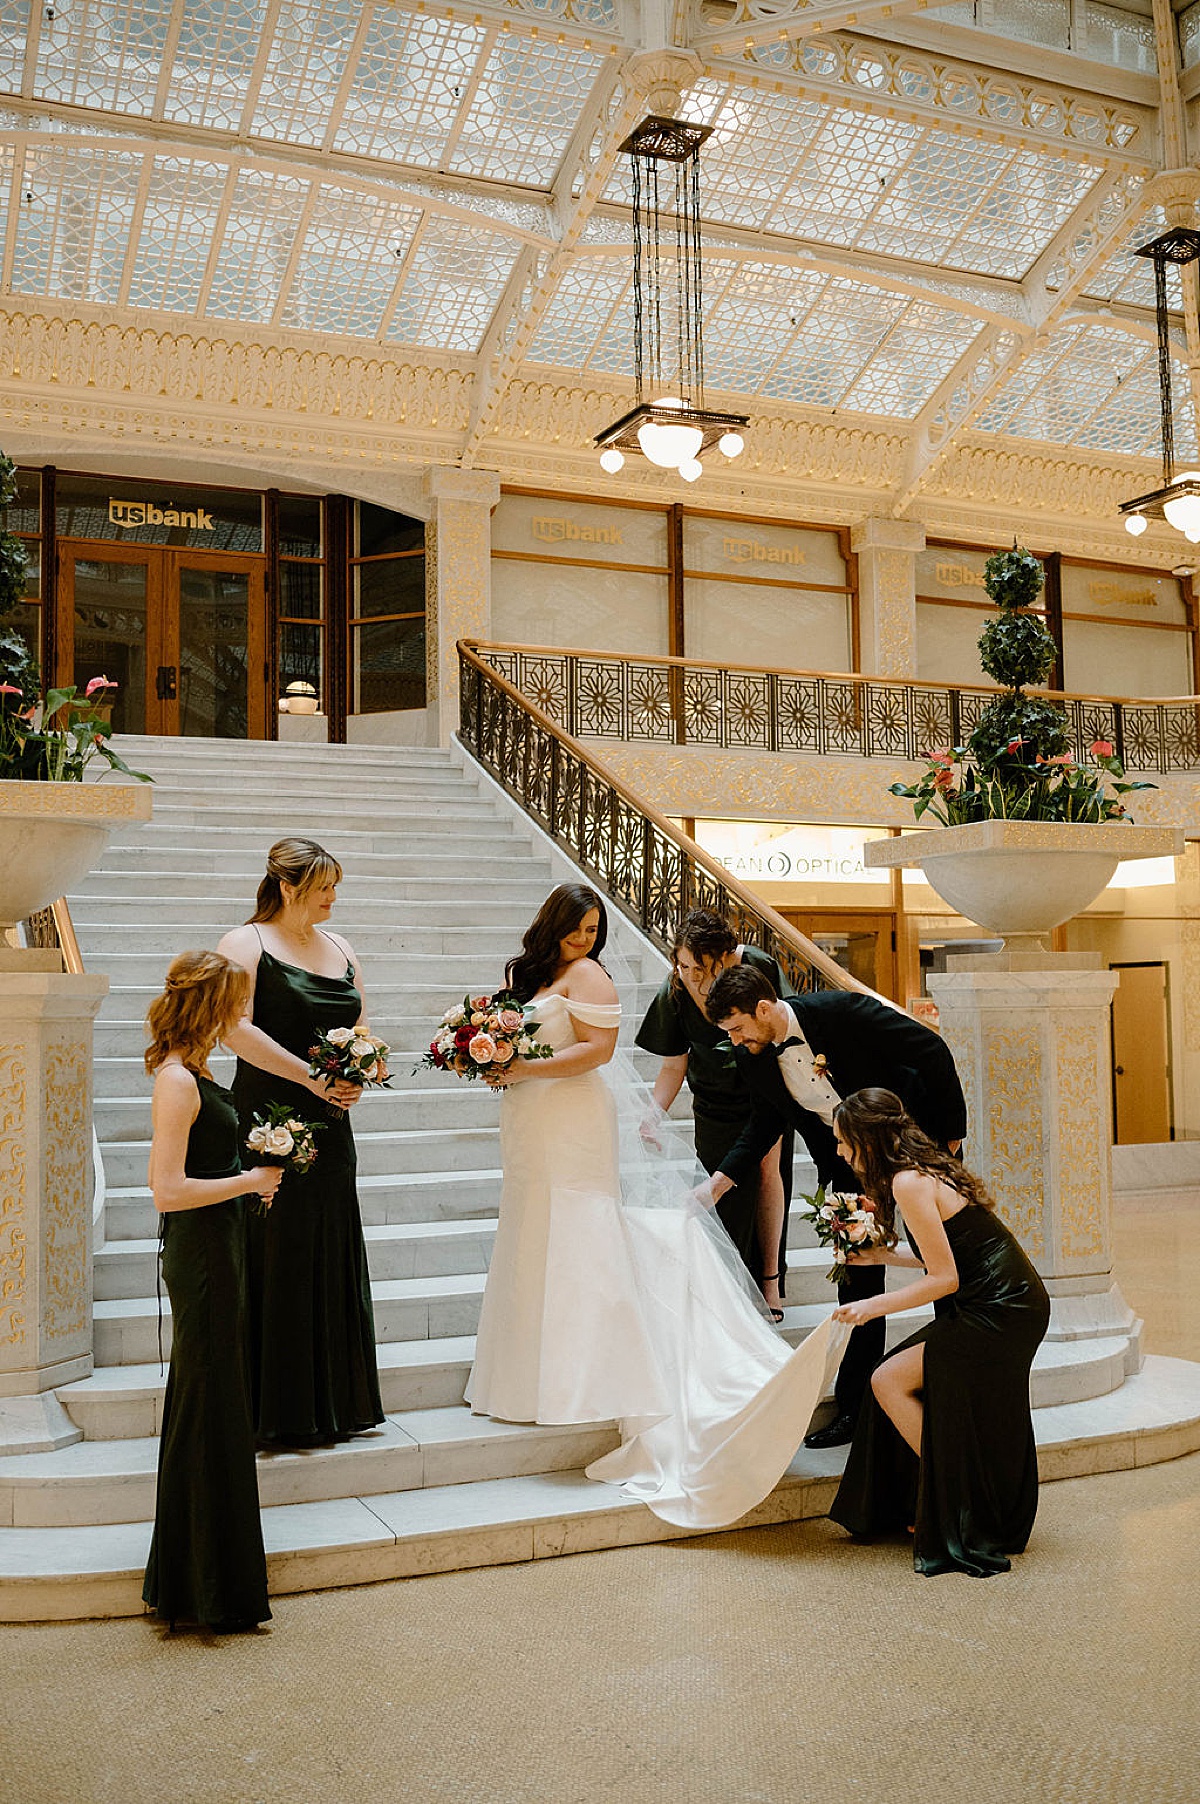 bridal party helps adjust bride's train during classy photos on marble steps shot by Chicago wedding photographer